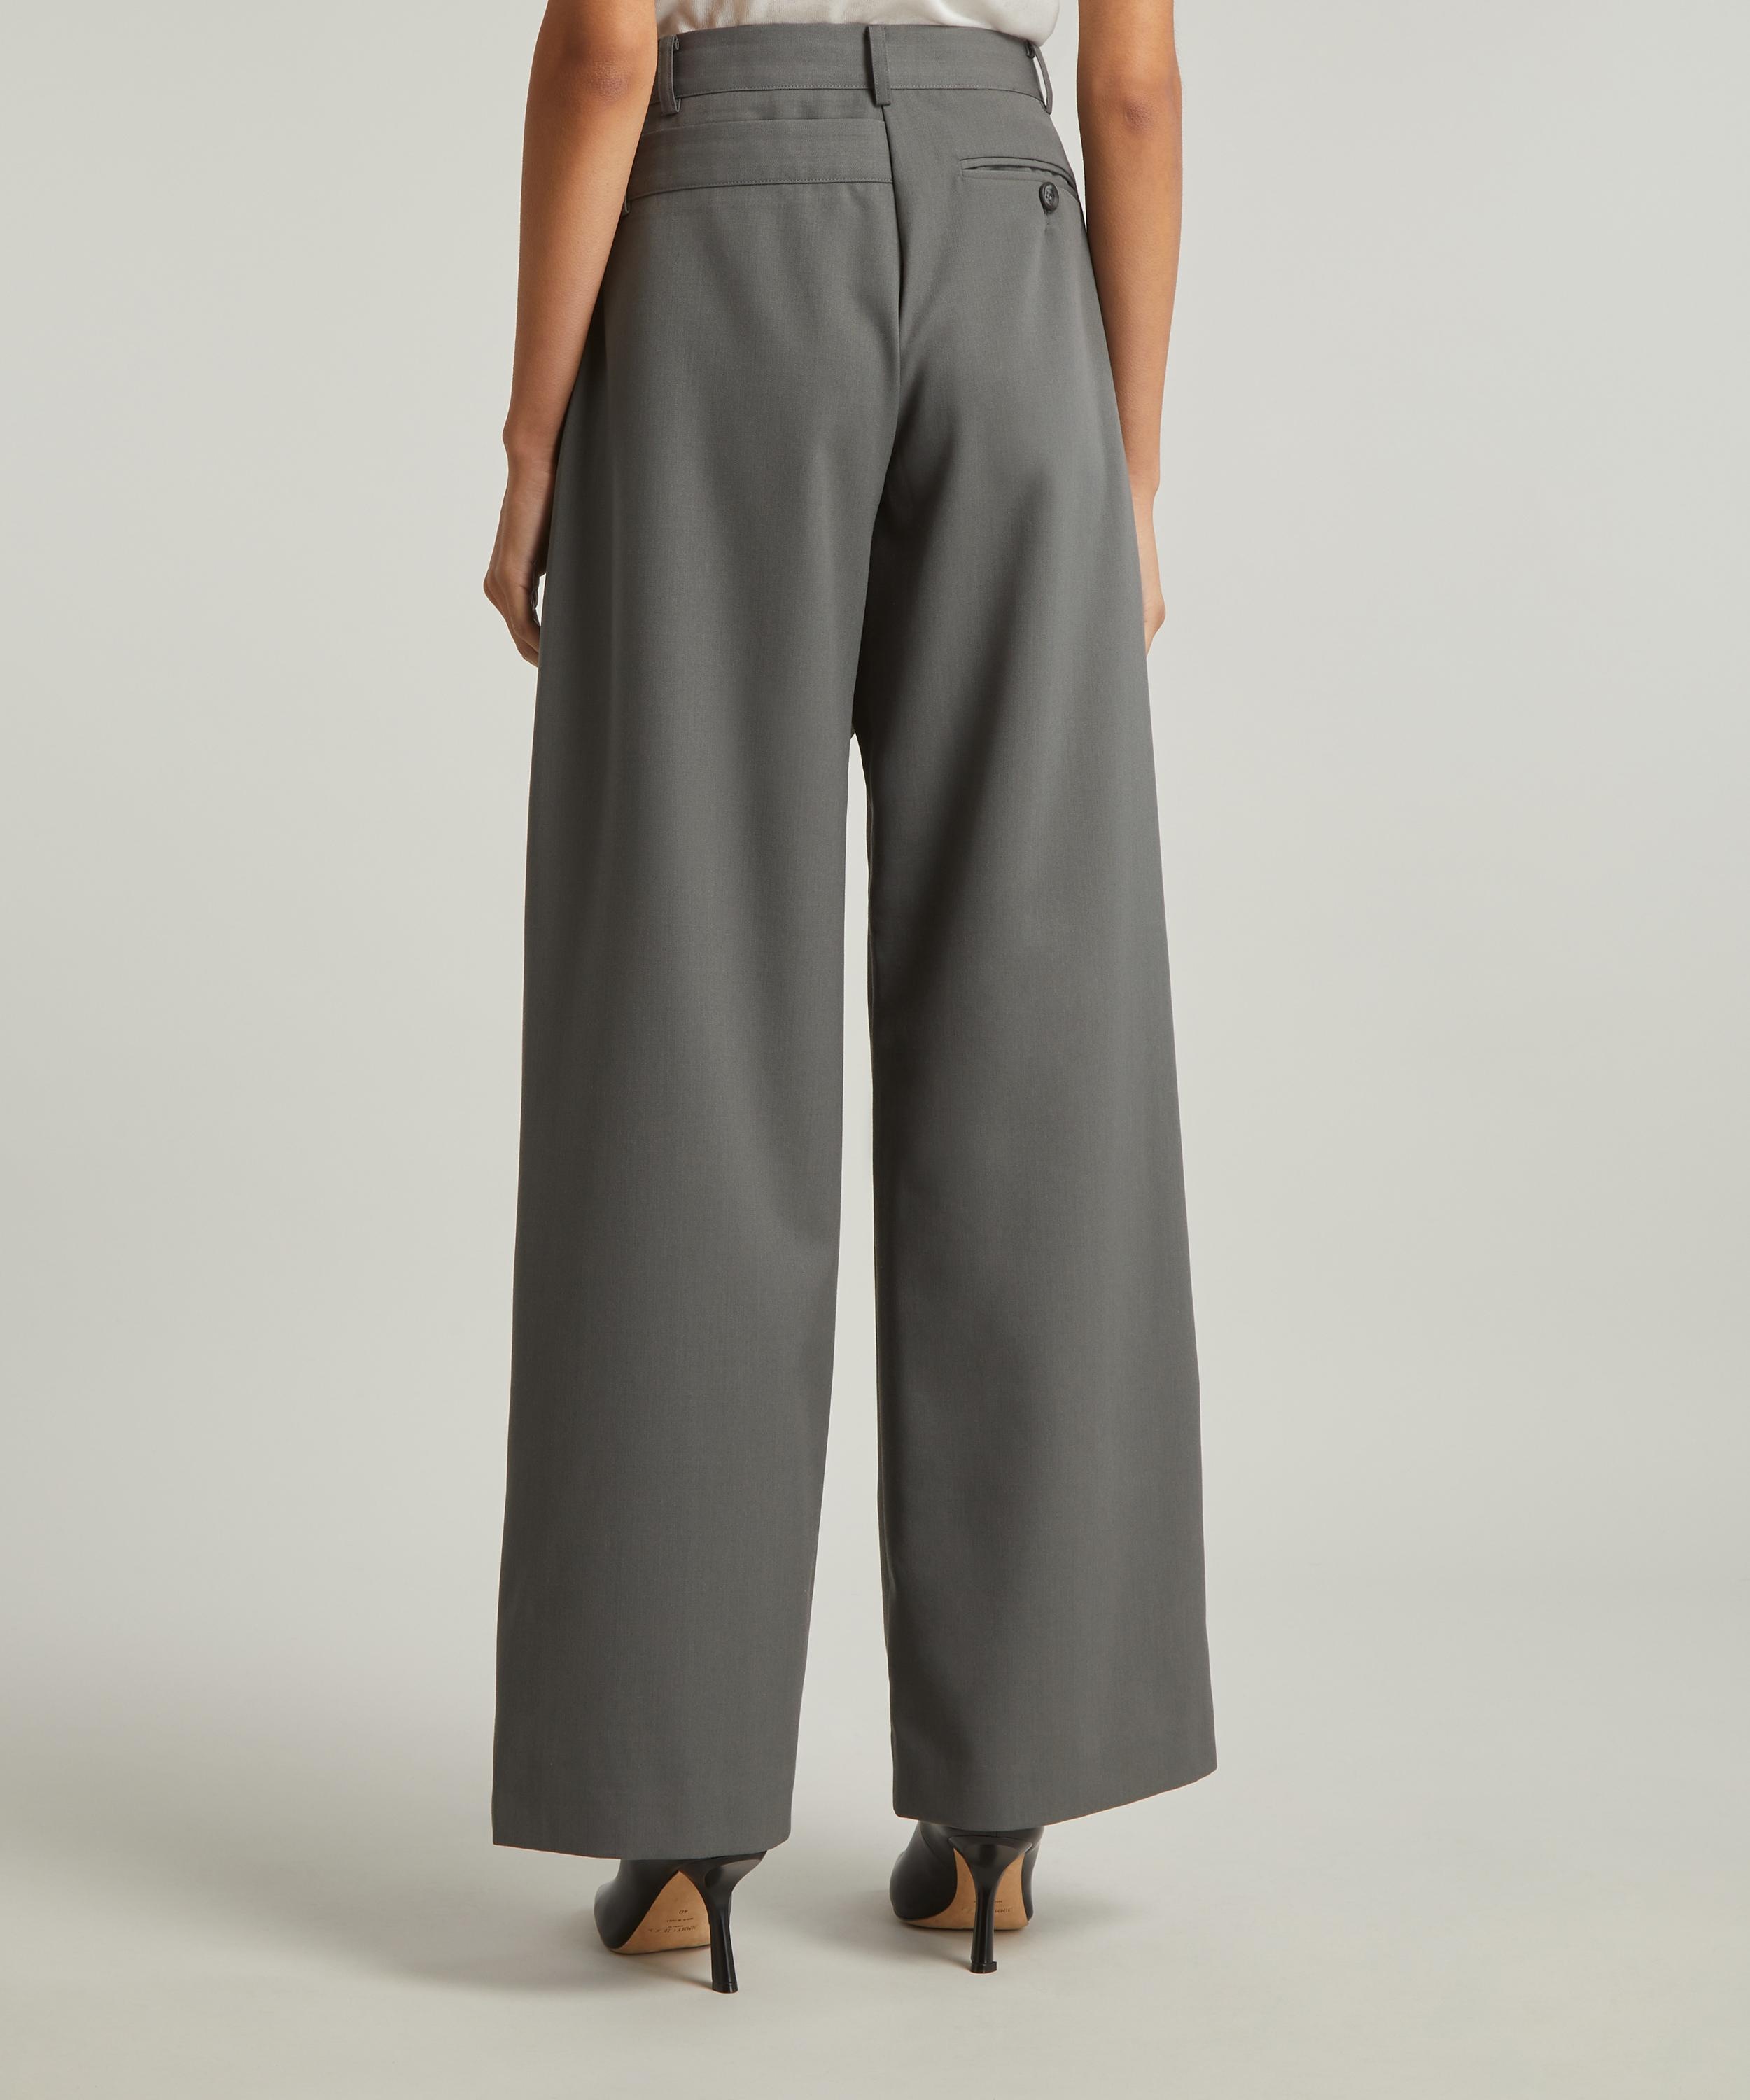 Deconstructed Waist Trousers - 4